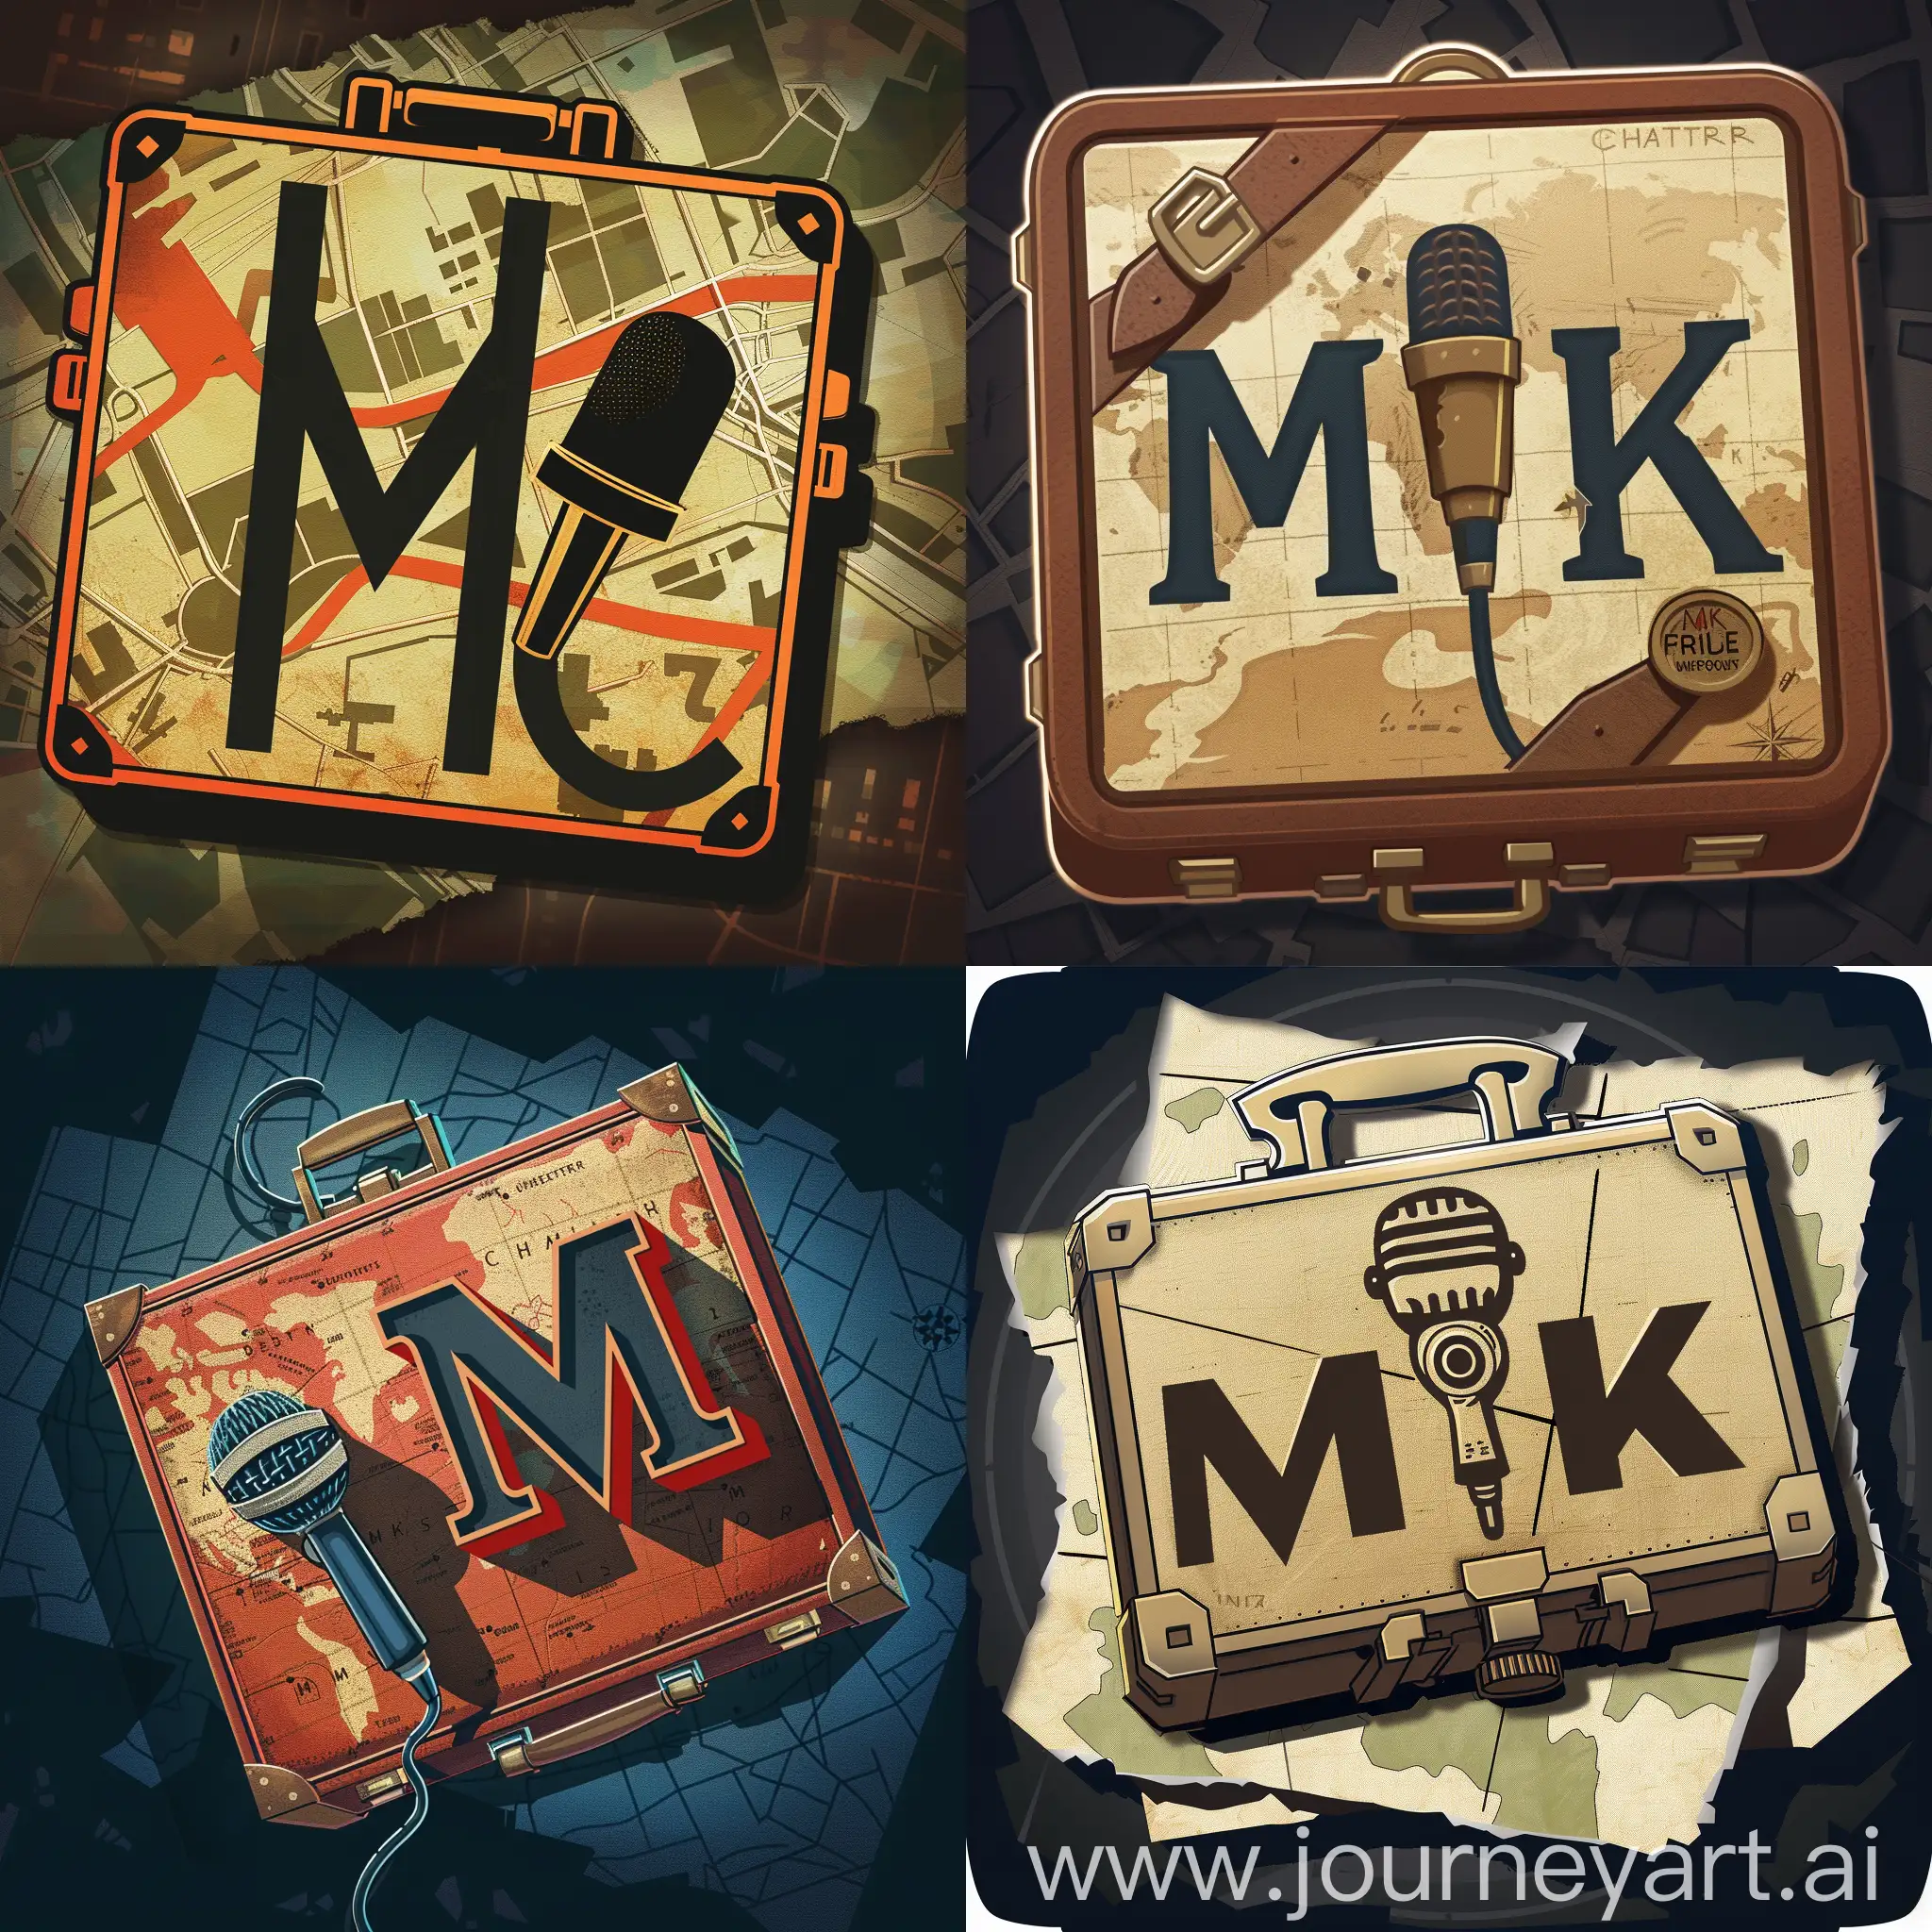 Mysterious-Briefcase-Logo-with-Microphone-and-Map-Background-for-Chatter-from-the-Underground